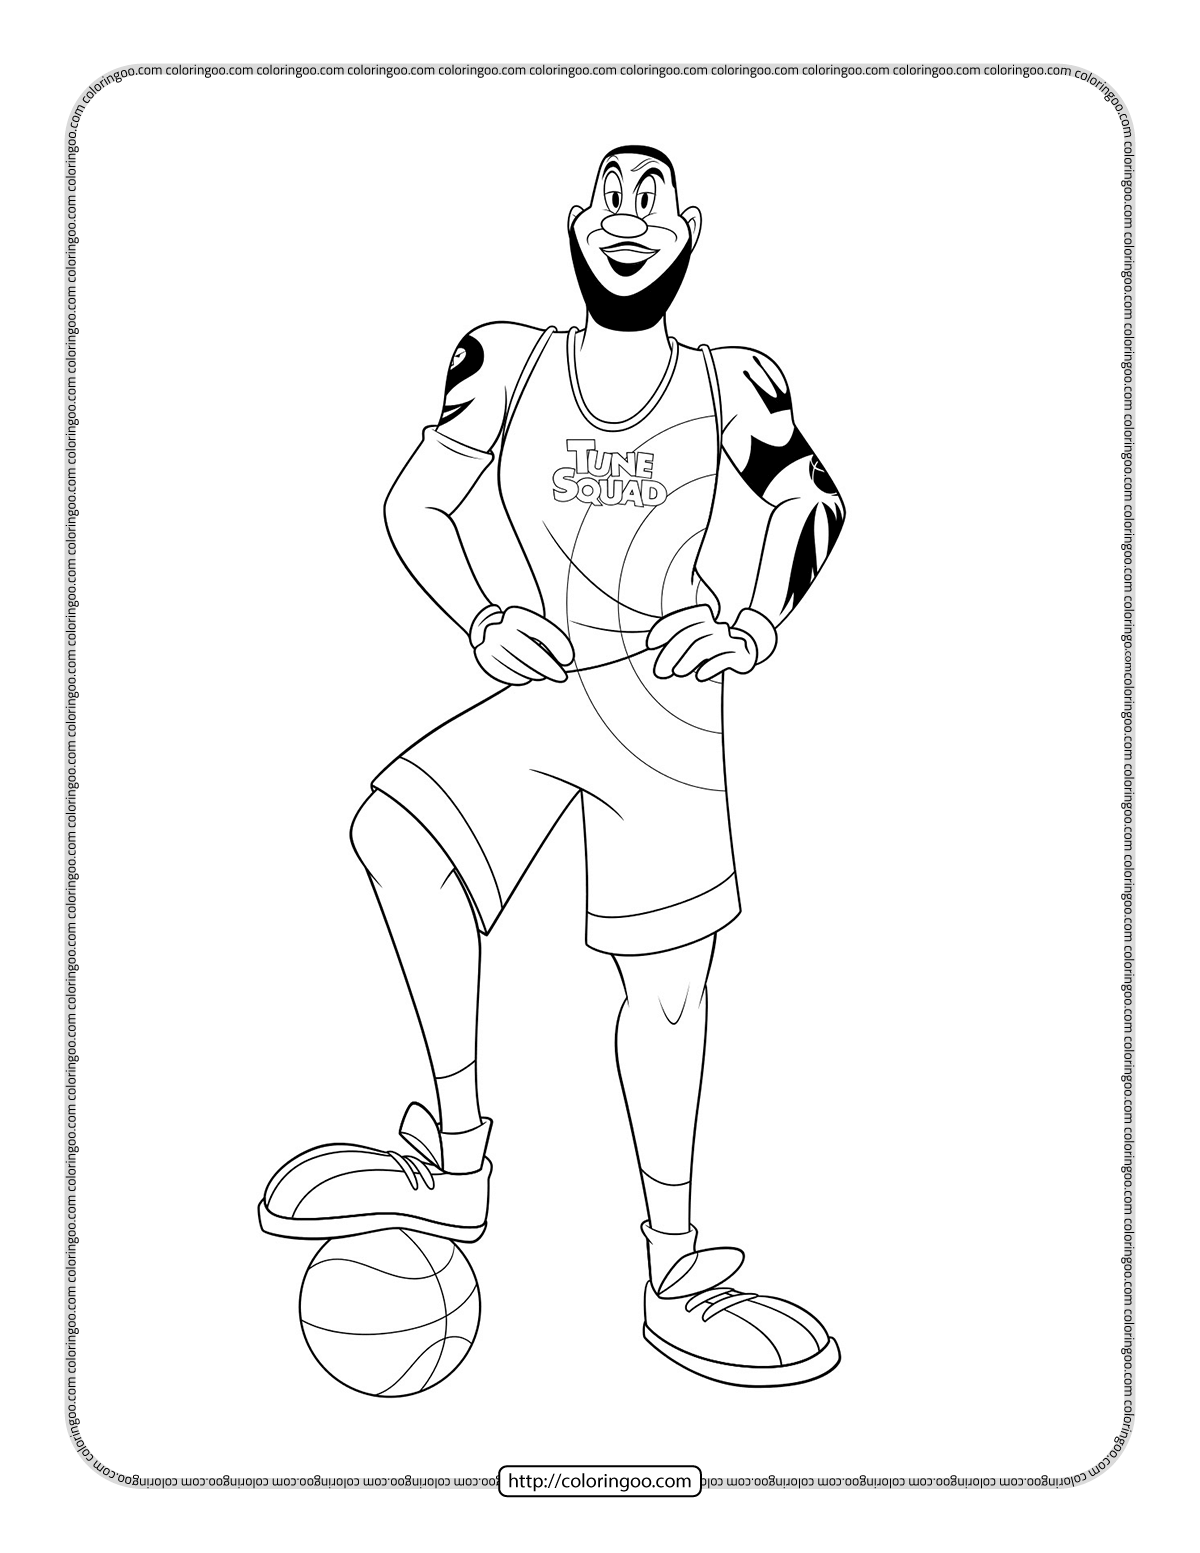 printable lebron james coloring pages